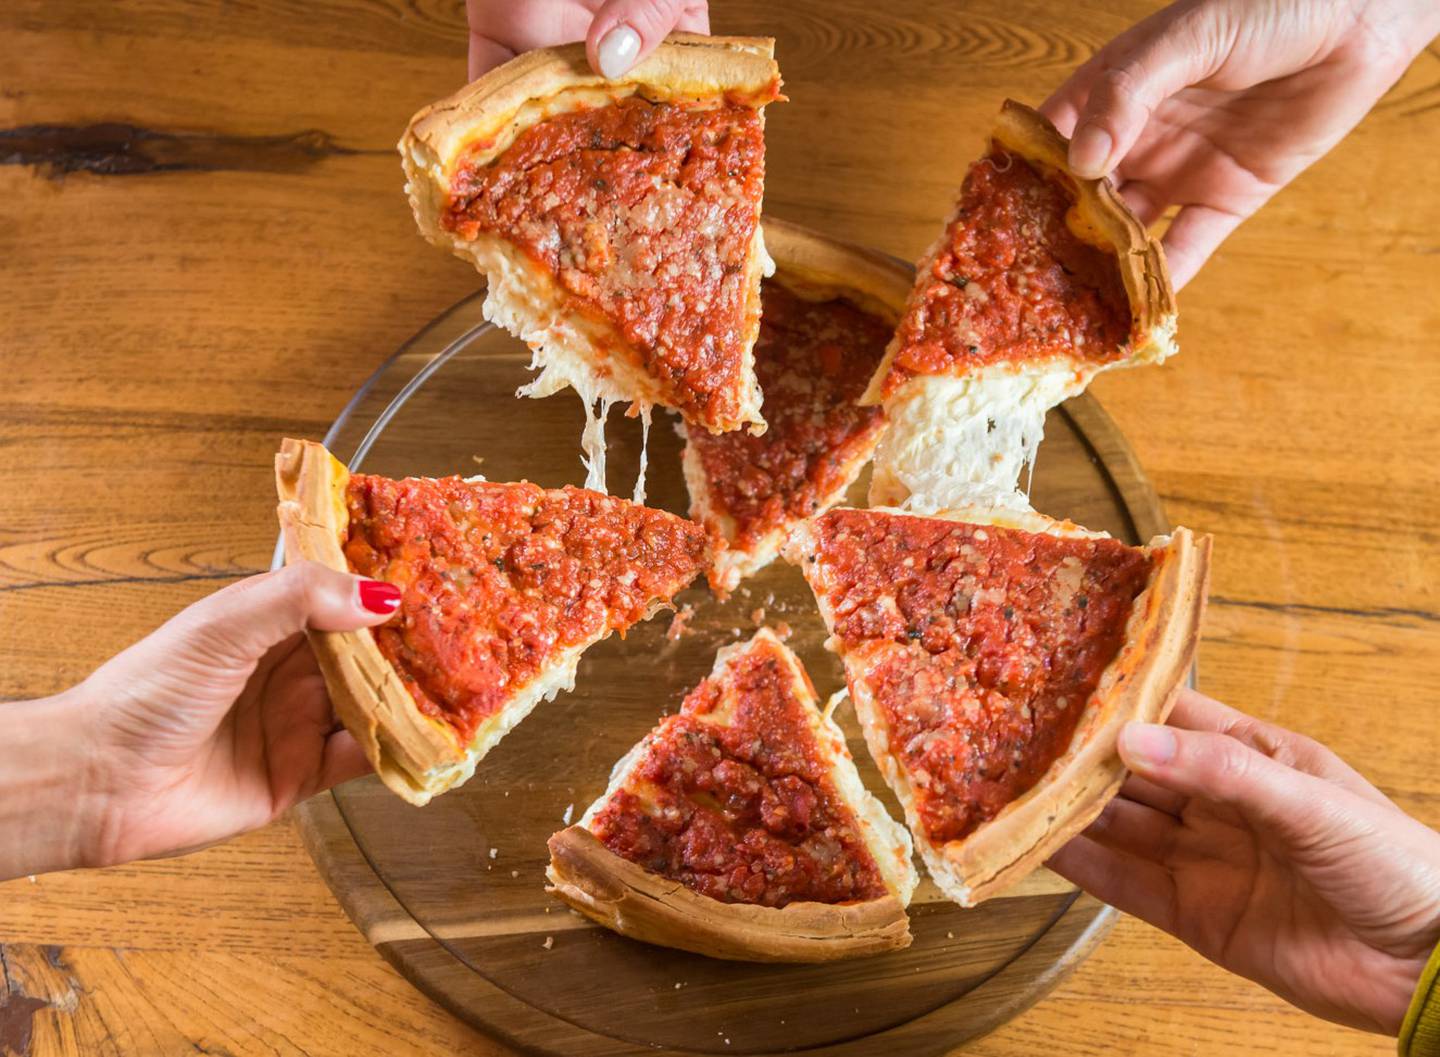 Giordano's was voted one of the best deep dish pizza places in Kane County for 2021 by our Best of the Fox readers. (Photo from Giordano's Facebook page)